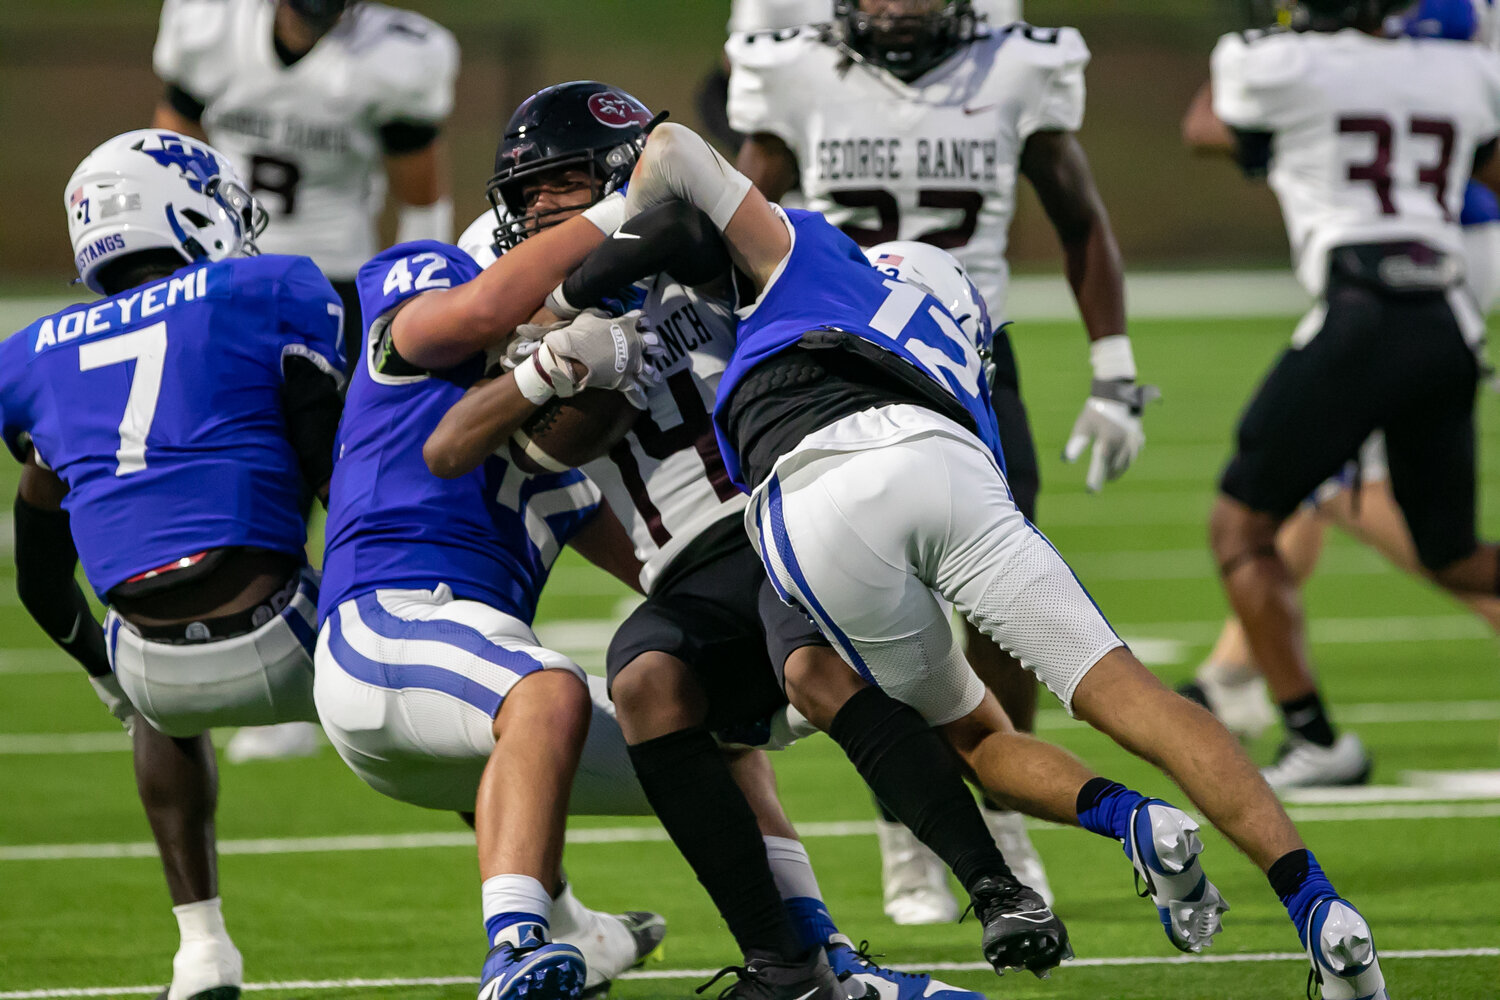 Duke Hammond and Josiah Rodriguez make a tackle during Thursday's game between Taylor and George Ranch at Rhodes Stadium.